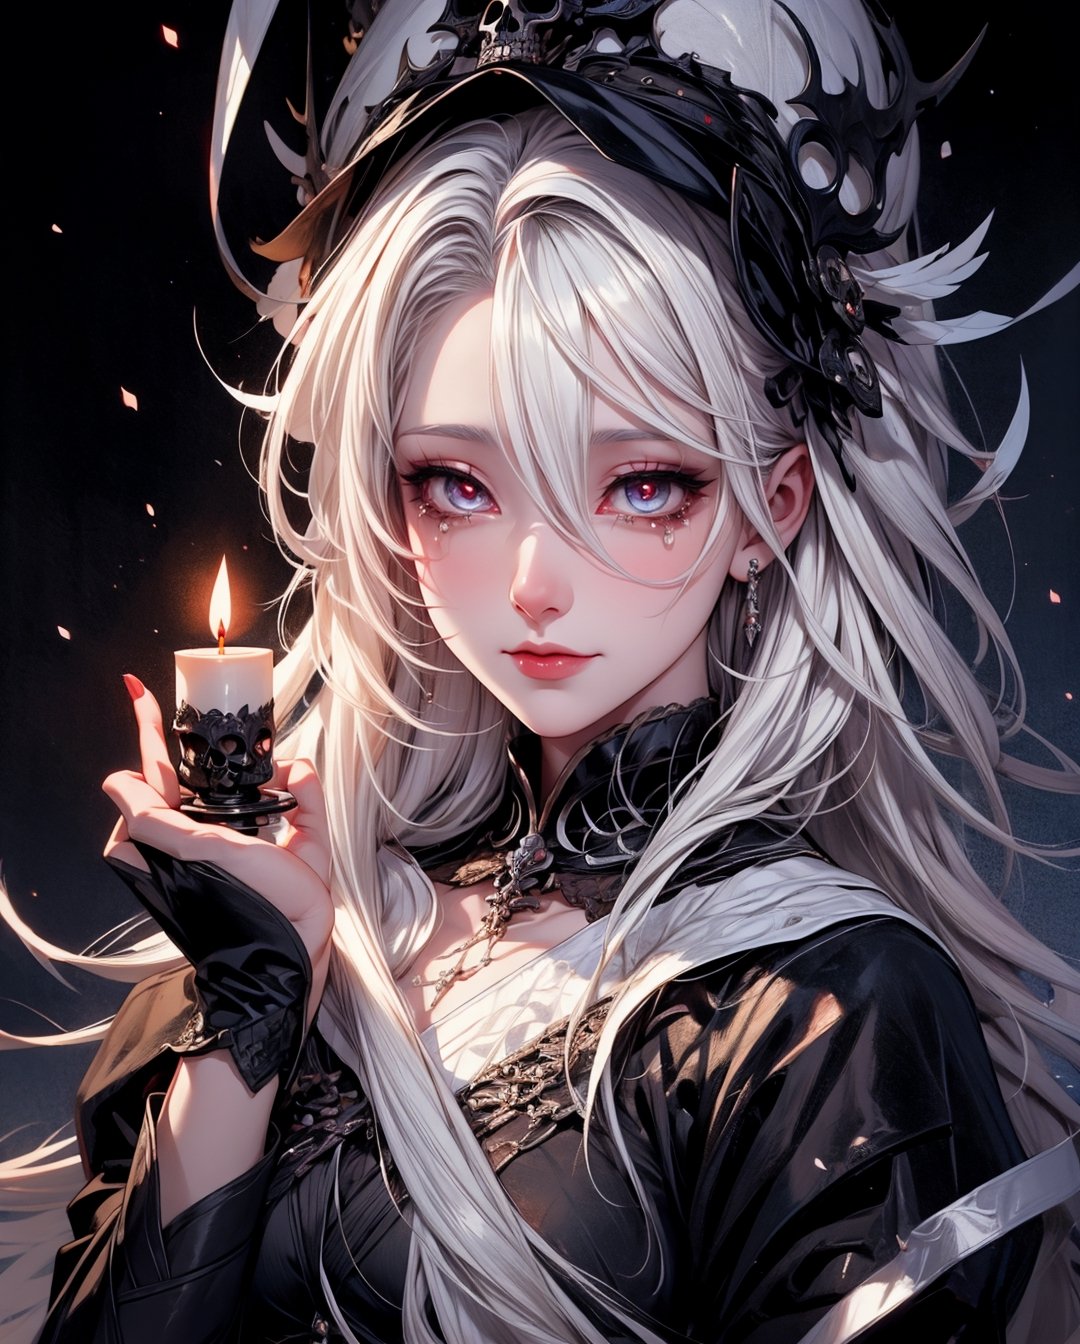 （tmasterpiece,best qualtiy）, solo,A white-haired woman holds a candle,anime skull portrait woman,beautiful necromancer girl,beautiful girl necromancer,,Smoky, flowing white hair,Harsh eyes,paleskin,black eyeshadows,Black blood and tears,Gothic shoujo anime characters,beautiful necromancer,gothic fantasy art,dark fantasy style art, white-haired god,Portrait of a female necromancer,Female necromancer,goddess of death,Dark moody lighting,with light glowing,mistic,magical,edge lit